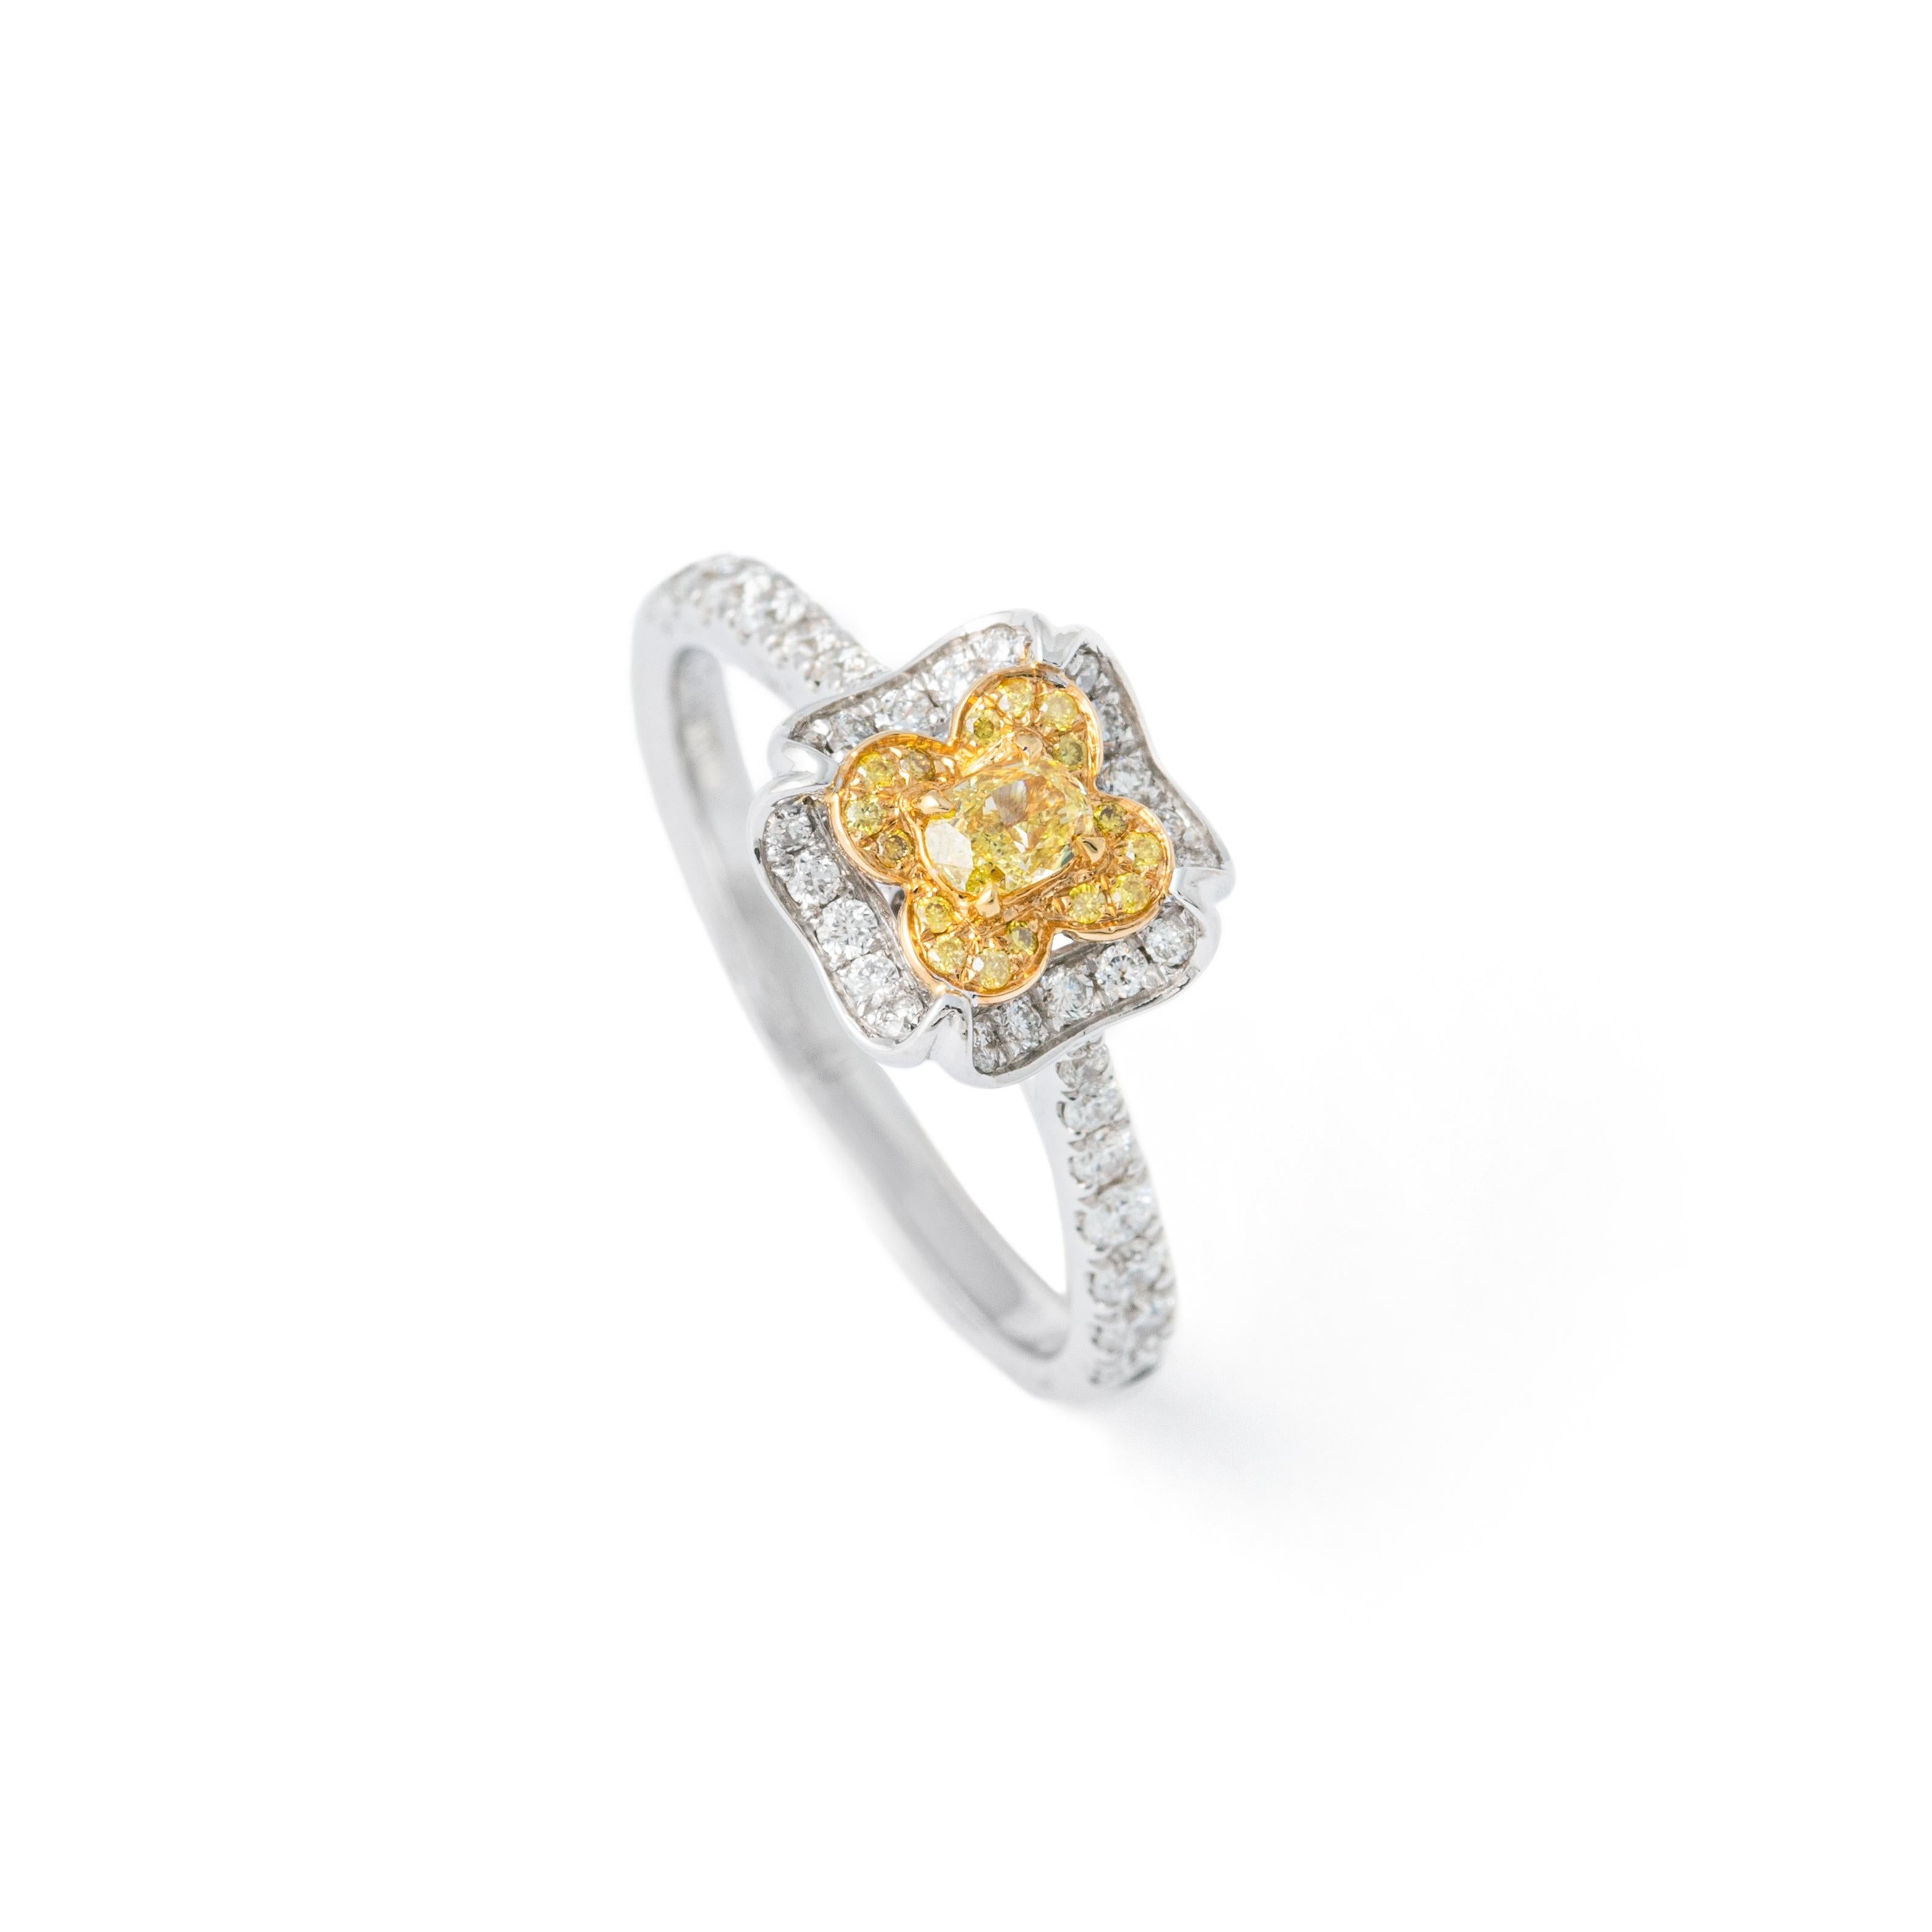 Fancy Yellow 0.10 carat Oval natural Diamond surrounded by 50 round cut Diamonds 0.37 carat total, estimated F / VS.
18K Gold Ring.
